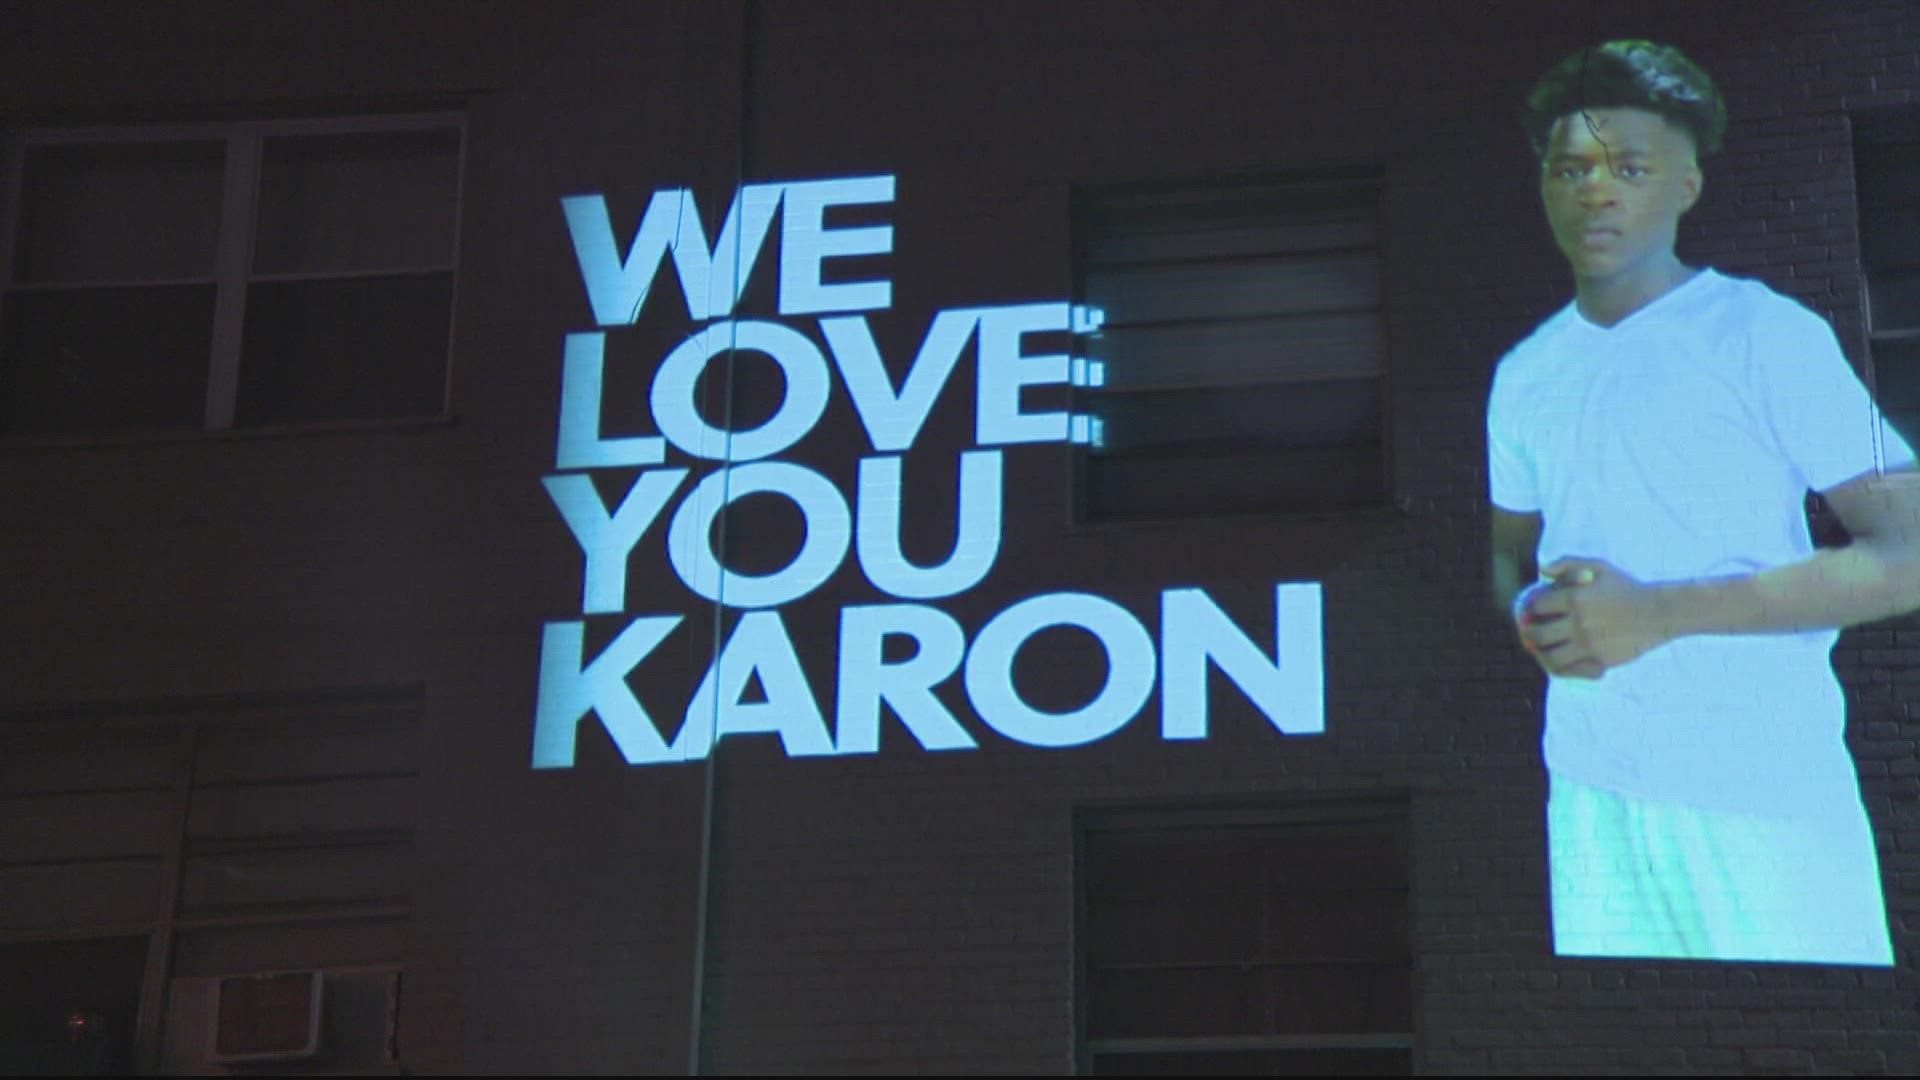 An entire community mourned together on Saturday evening. It's been one week since Karon Blake was killed on Quincy Street Northeast.